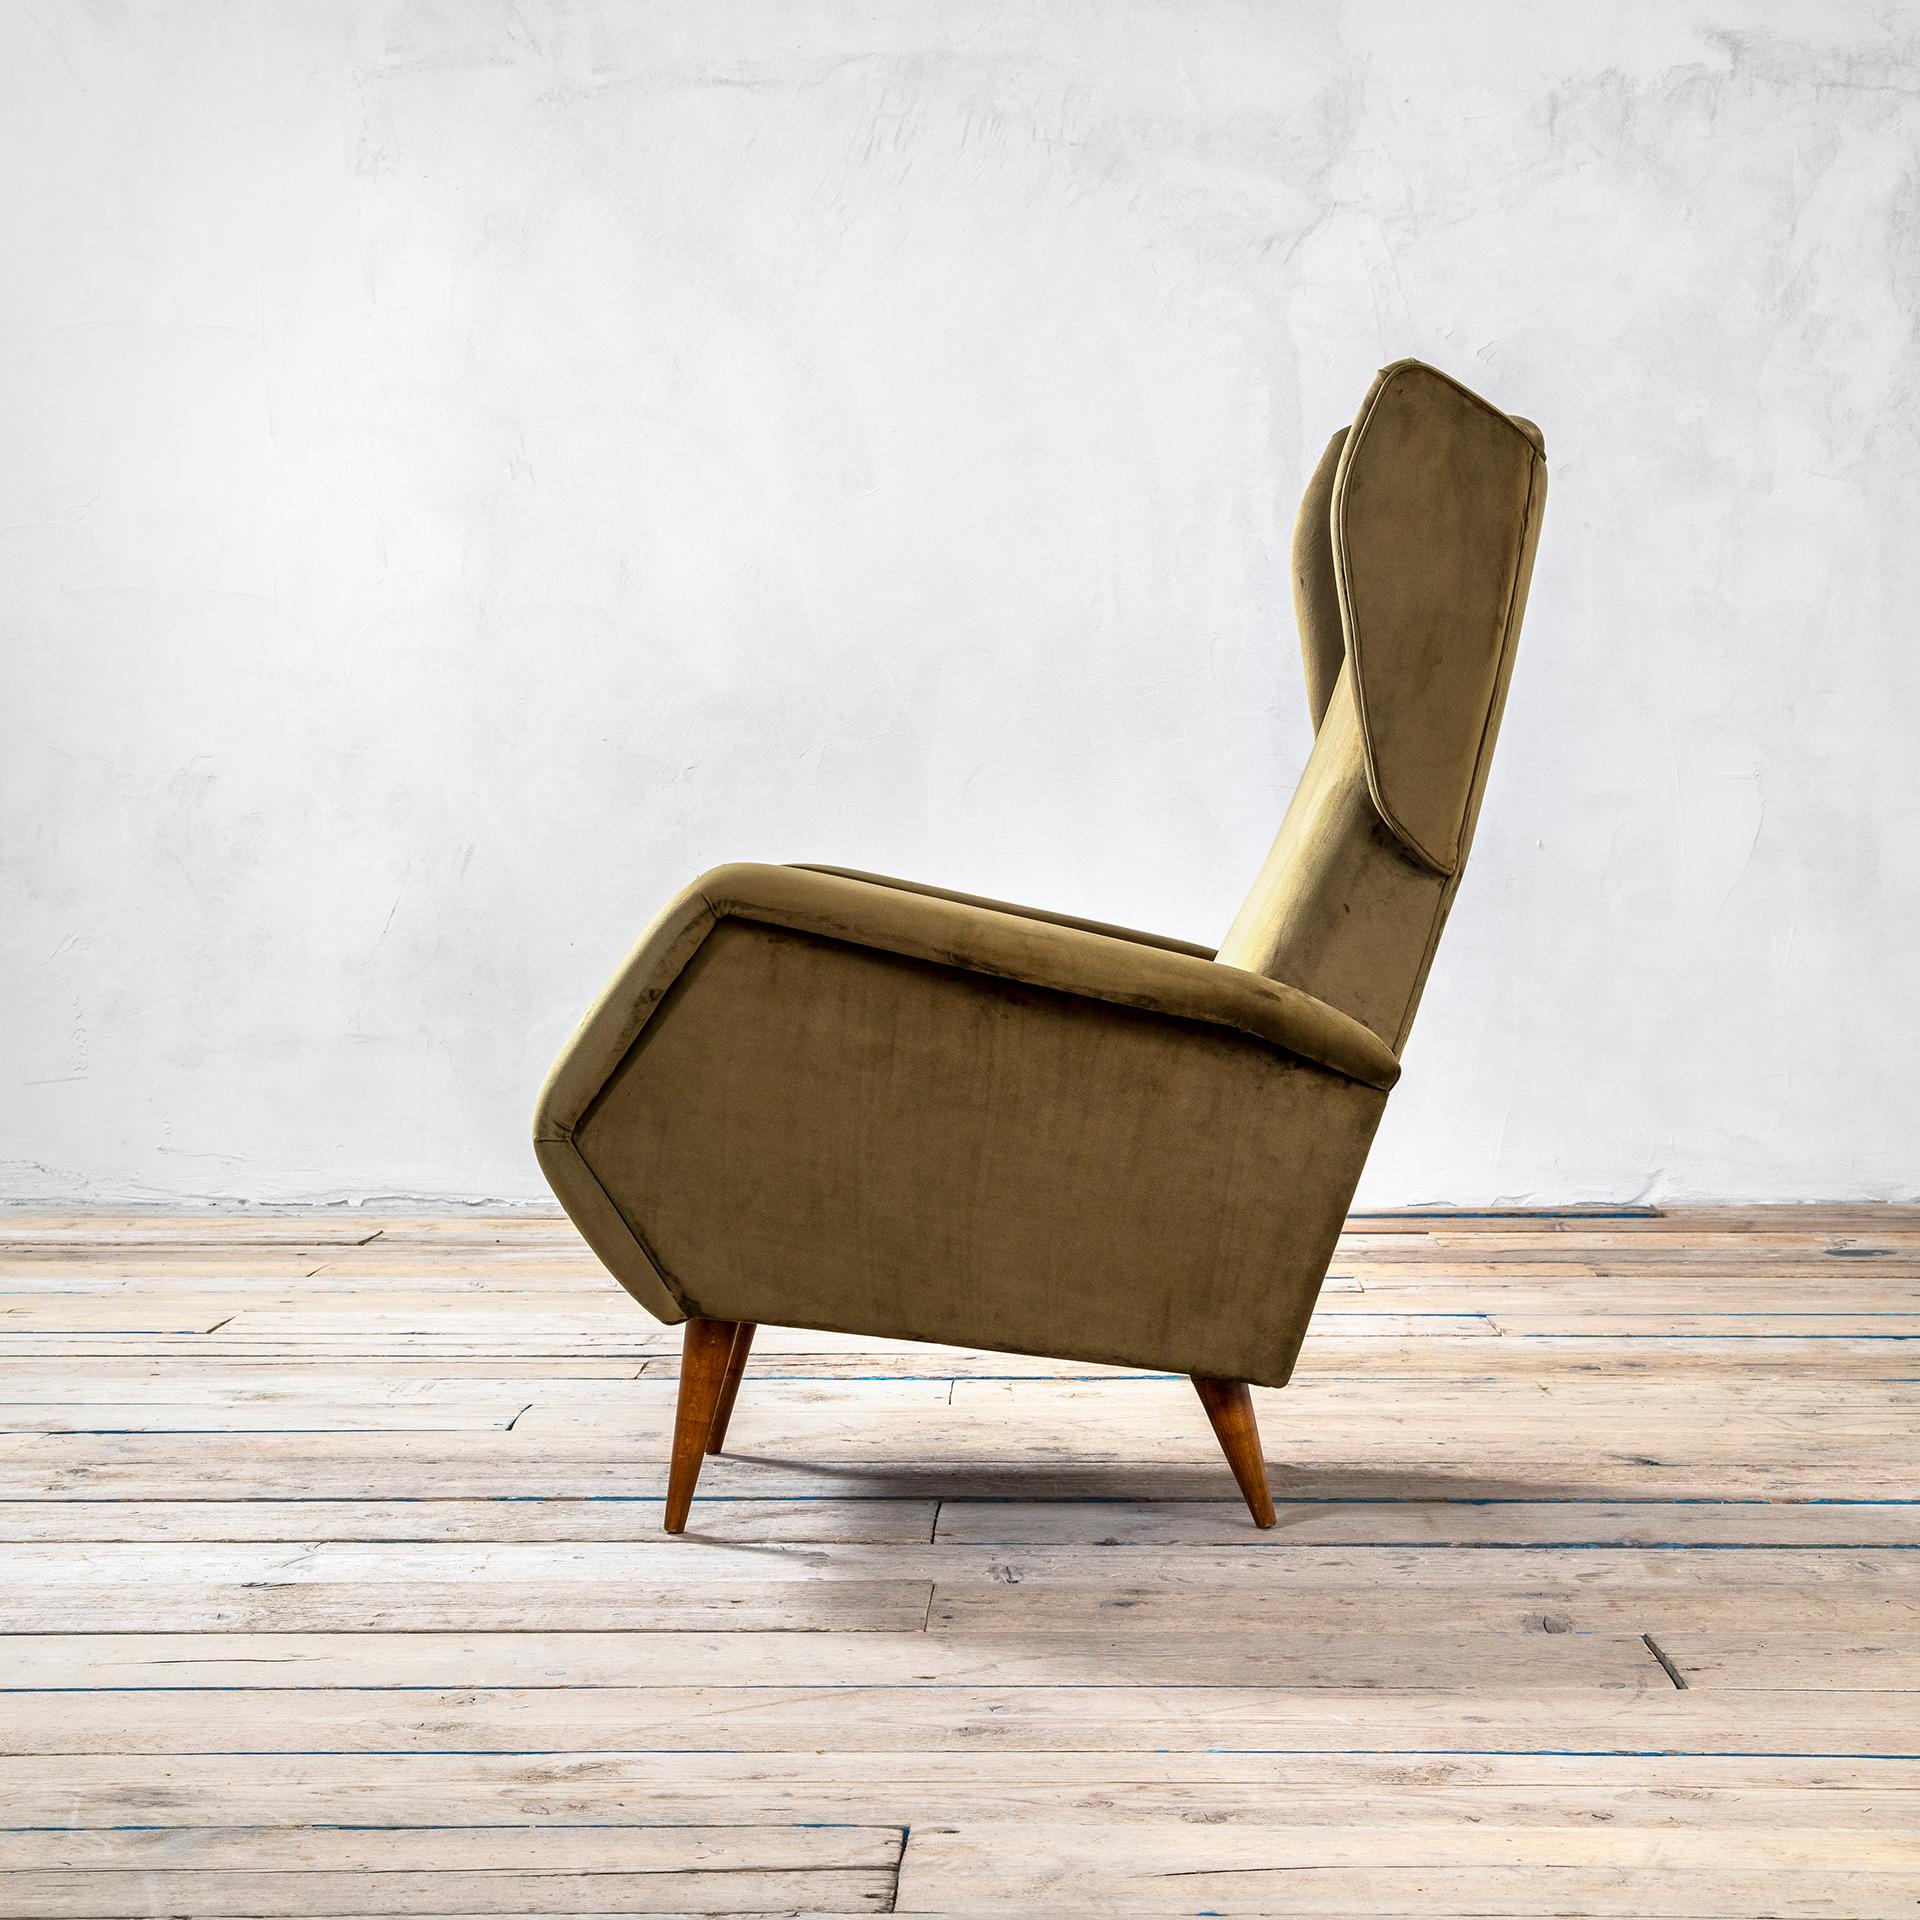 Pair of armchairs designed by Gio Ponti for Cassina in '50s. The armchair has a wooden structure with 4 wooden feet, and fabric upholstery. The model of the armchairs remember a kind of bergere, but its style is in definitive more modern. This model